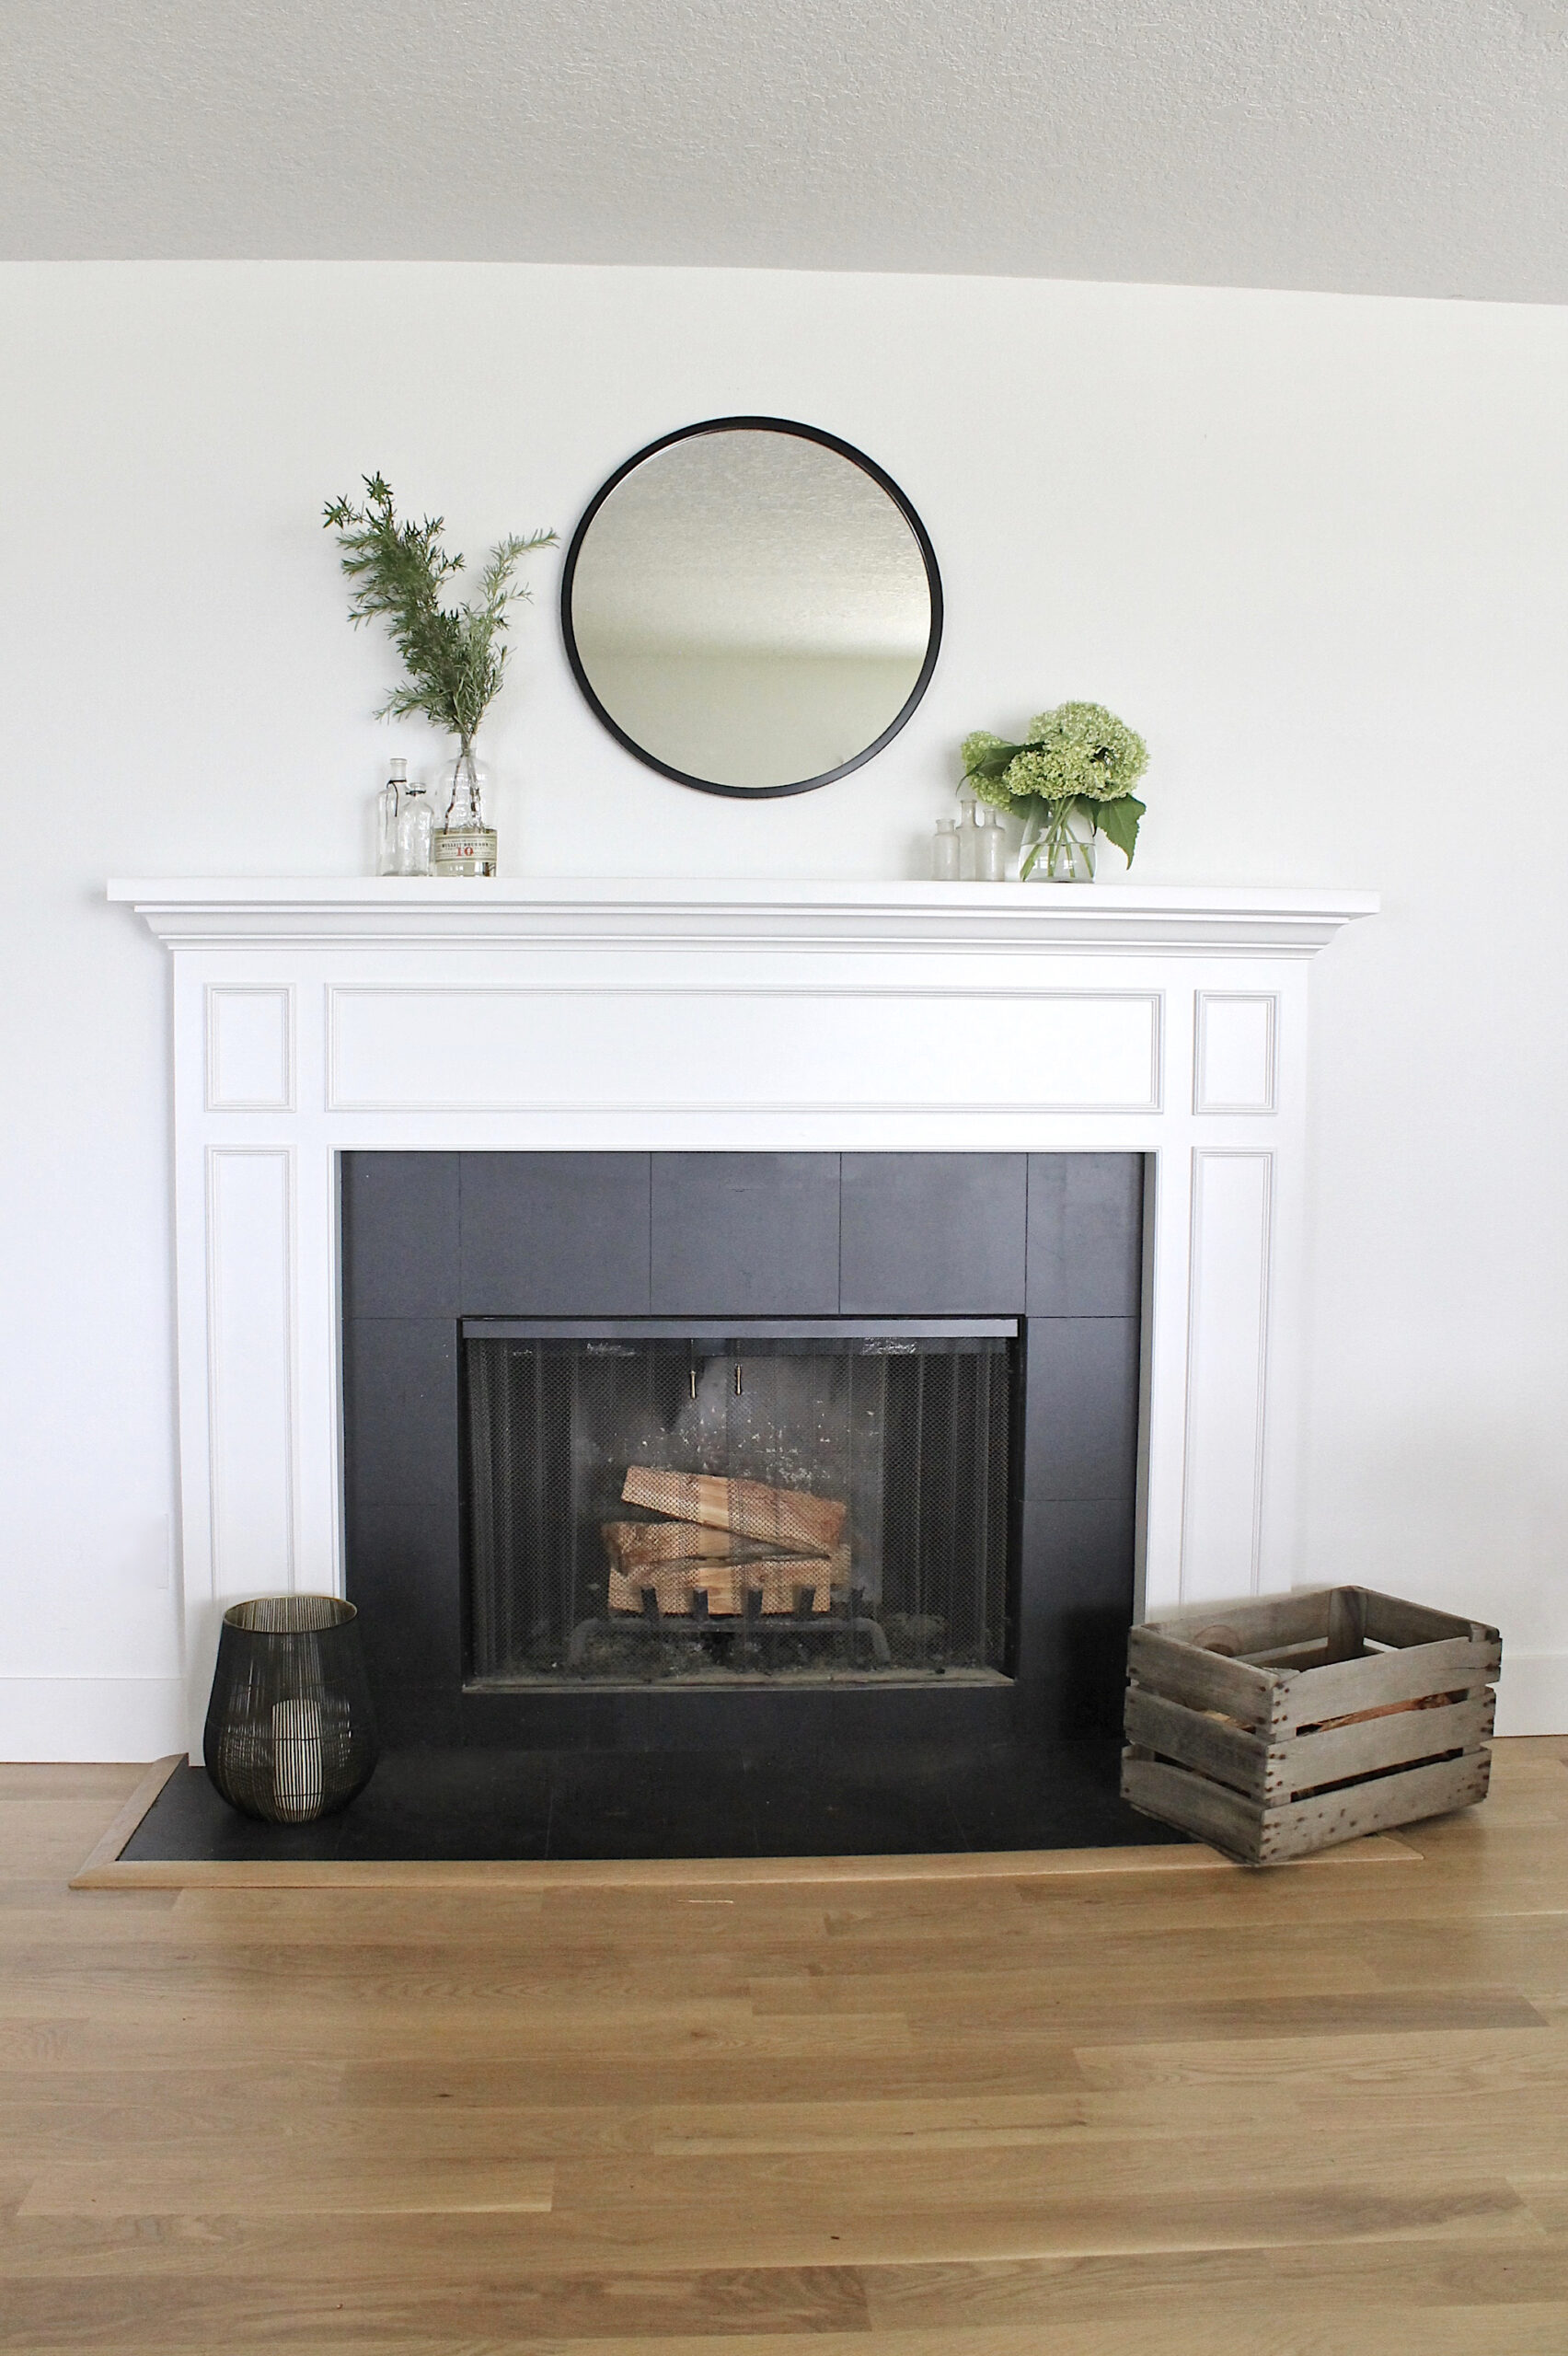 How To Paint A Ceramic Tile Fireplace, How To Replace Tile Around Fireplace